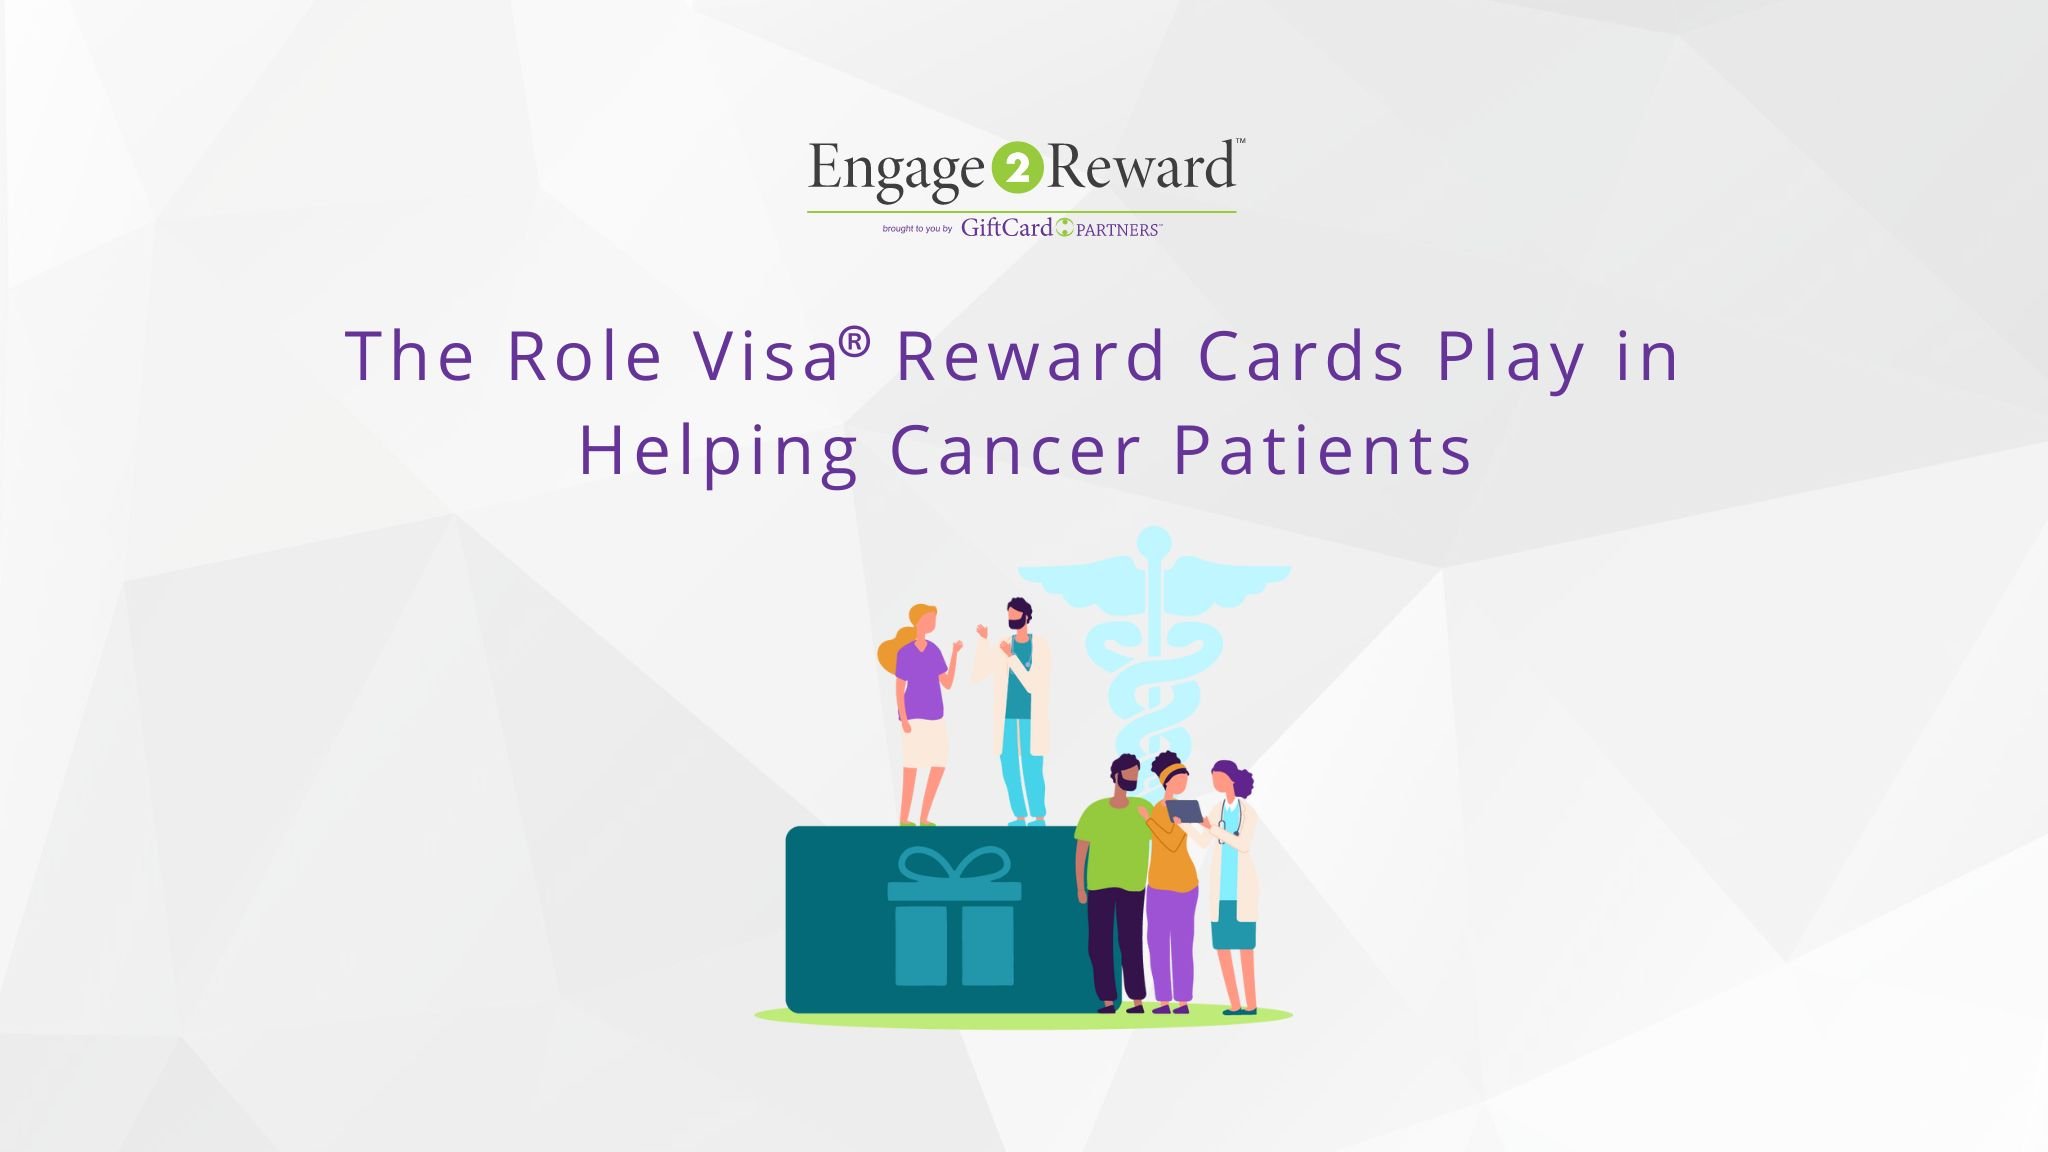 The Role Visa Reward Cards Play in Helping Cancer Patients